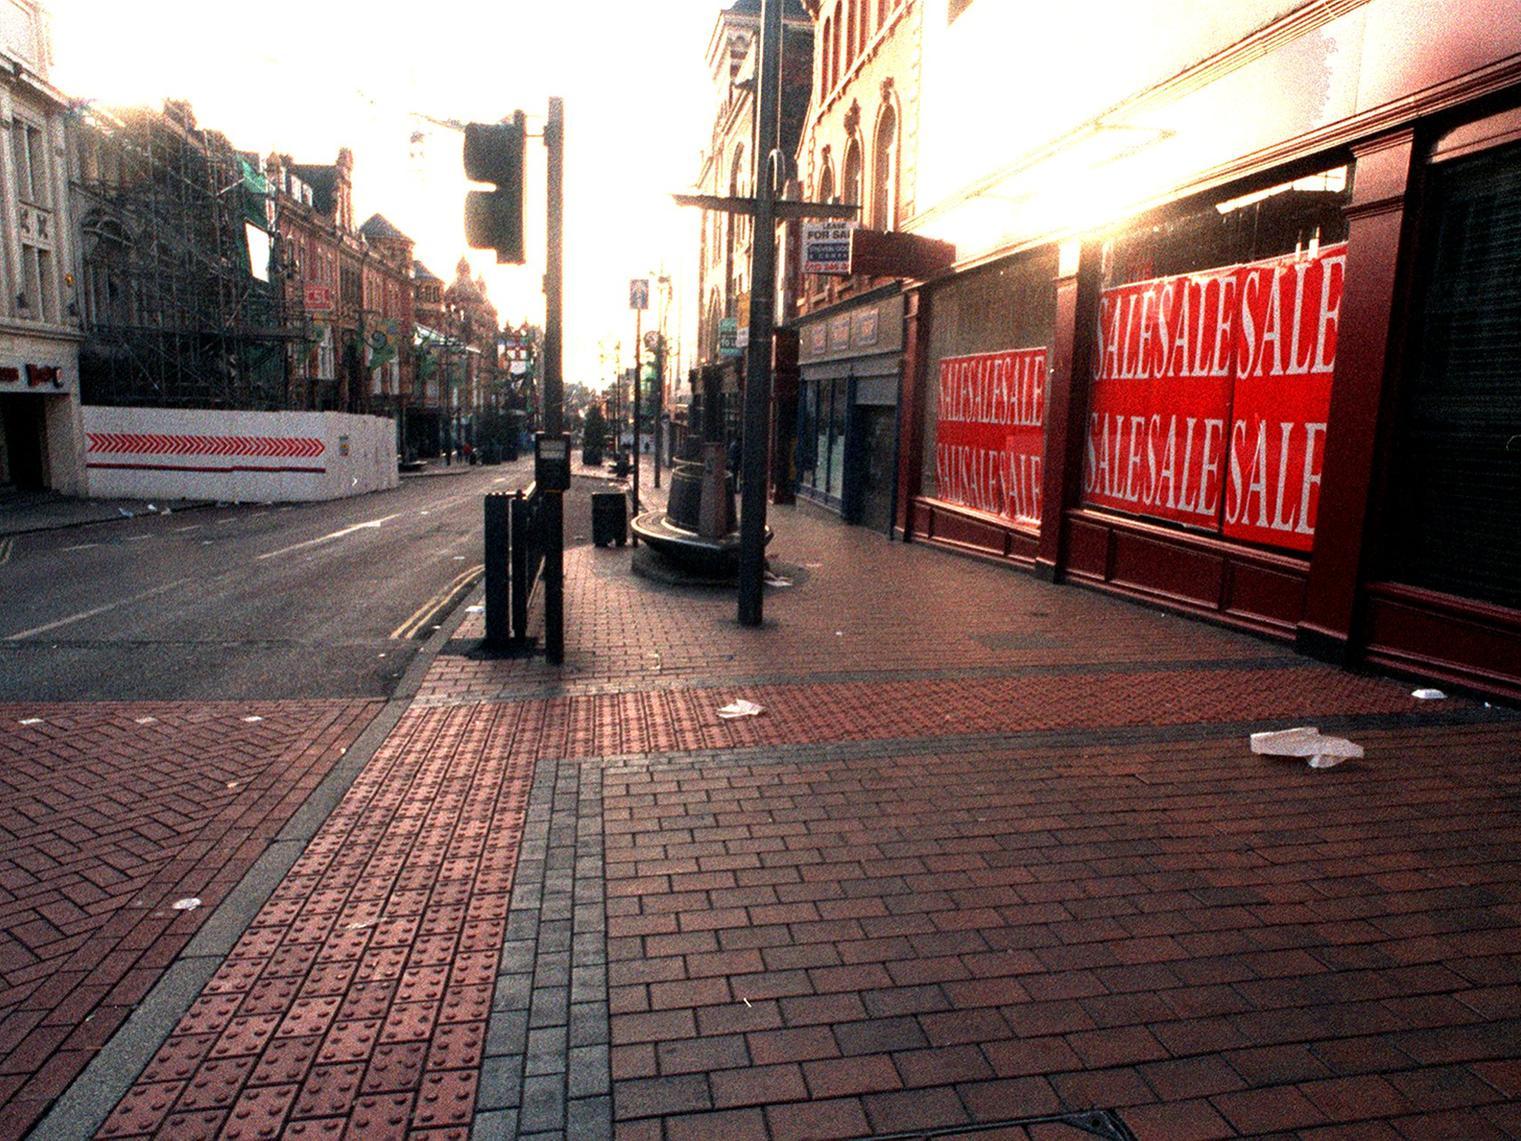 The morning after the night before. A deserted Briggate on New Year's Day in the city centre.